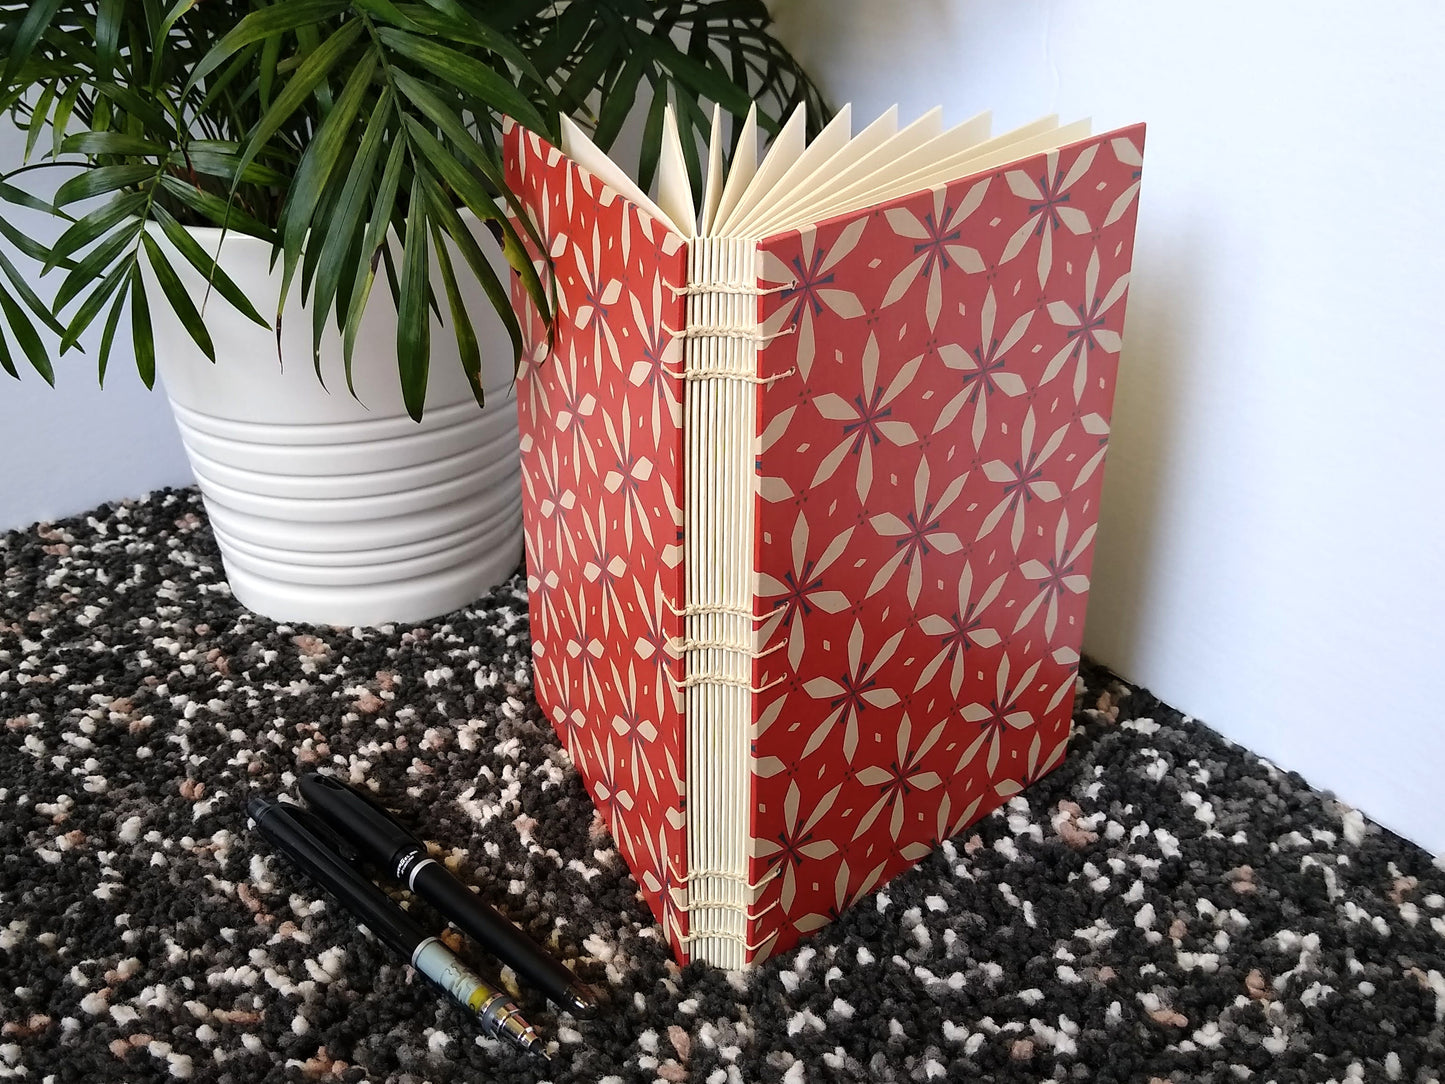 A handmade journal sits upright beside a potted plant, and a black pen and mechanical pencil. The cover of the journal has a red and cream geometric floral design on it. The open spine and cream thread stitching are visible.